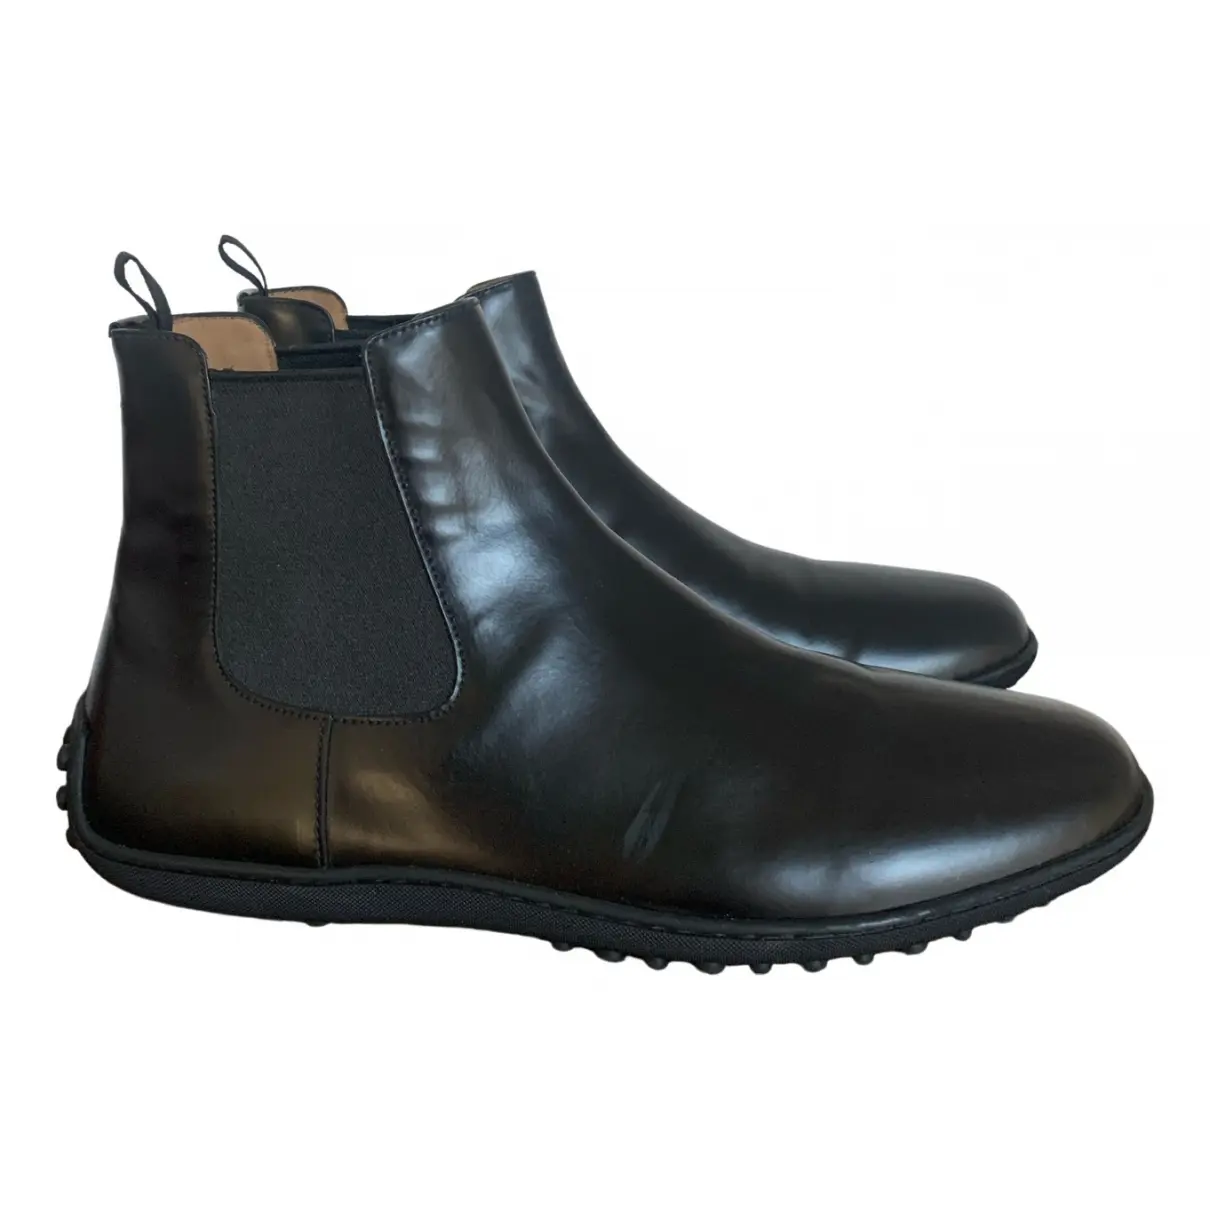 Leather boots Carshoe